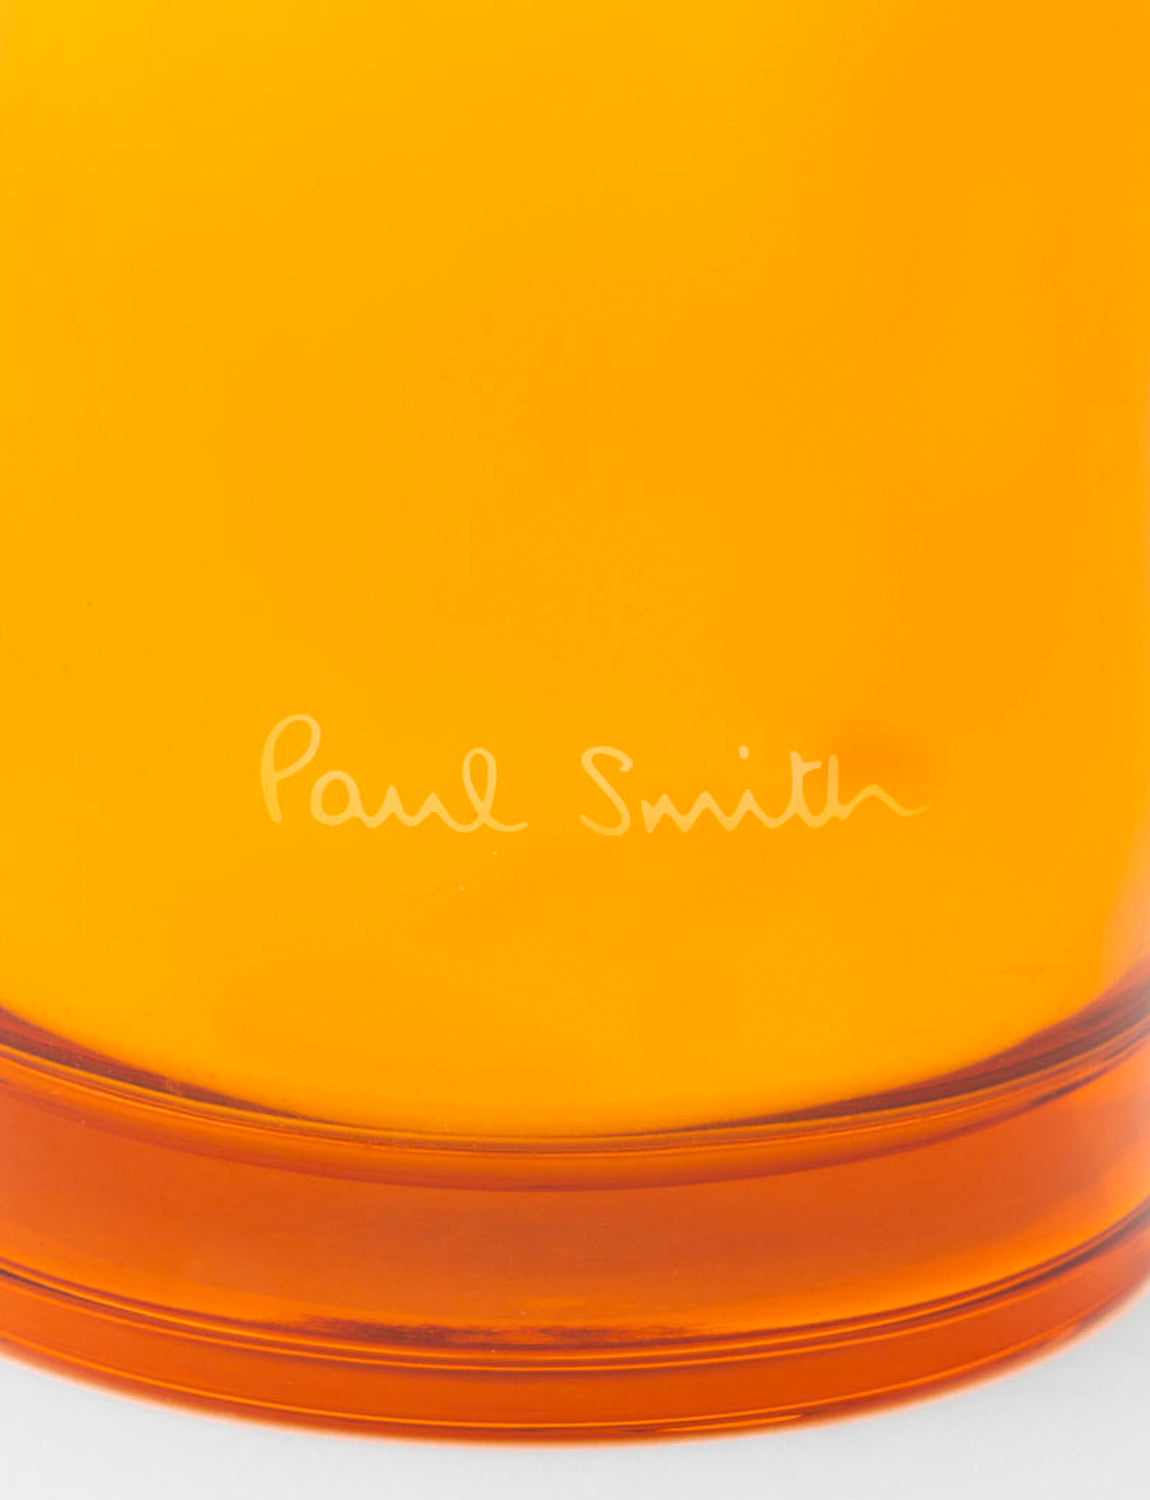 Paul Smith Bookworm Scented Candle